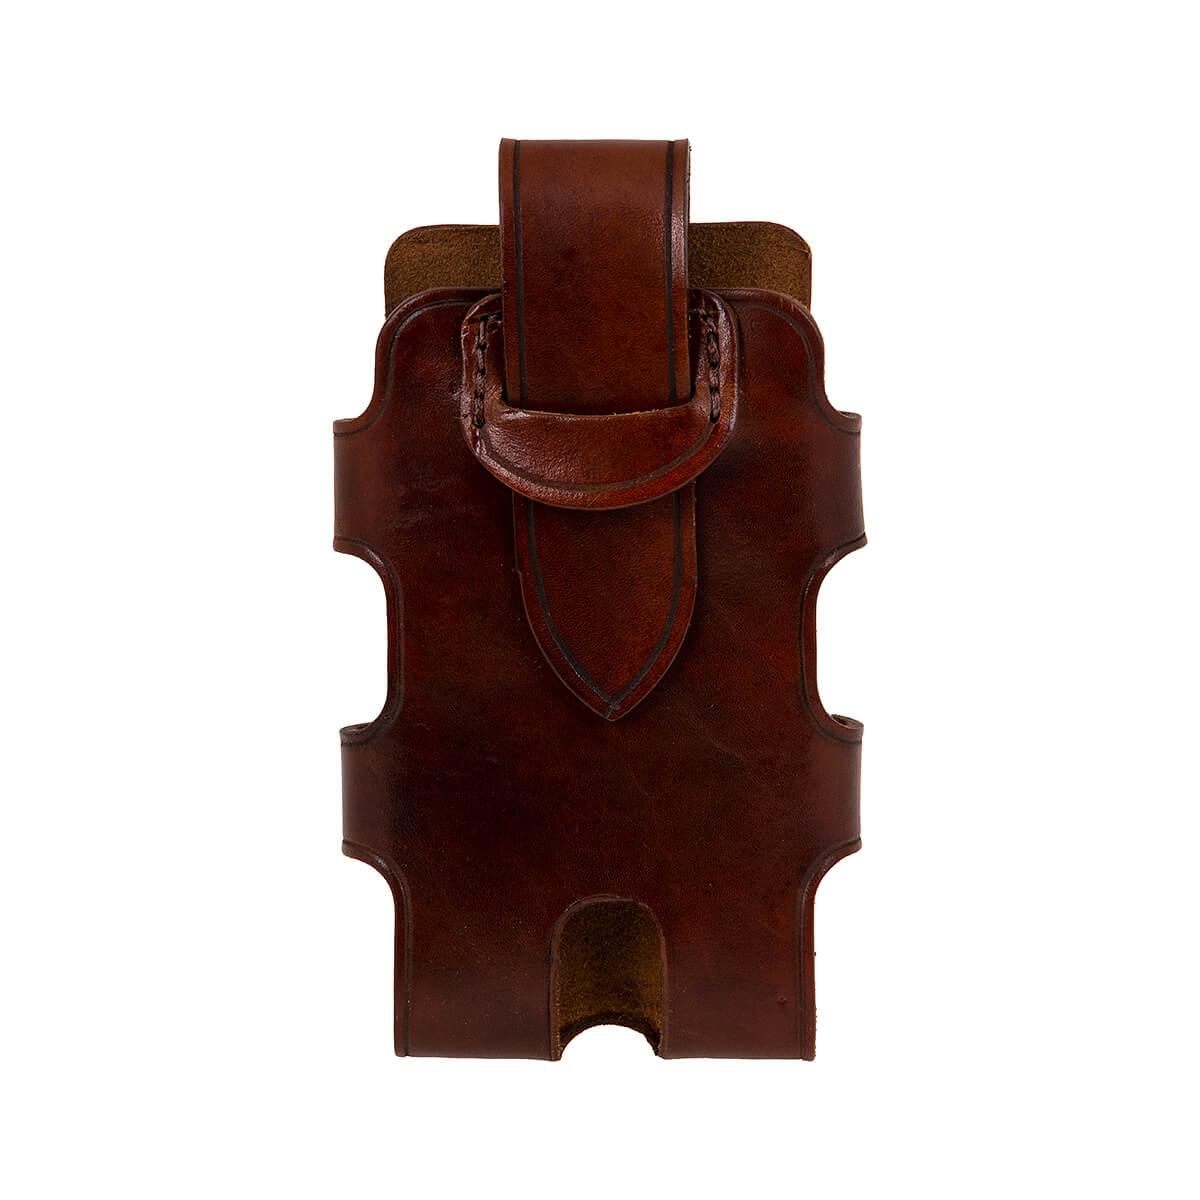  Medium Leather Cell Phone Holster